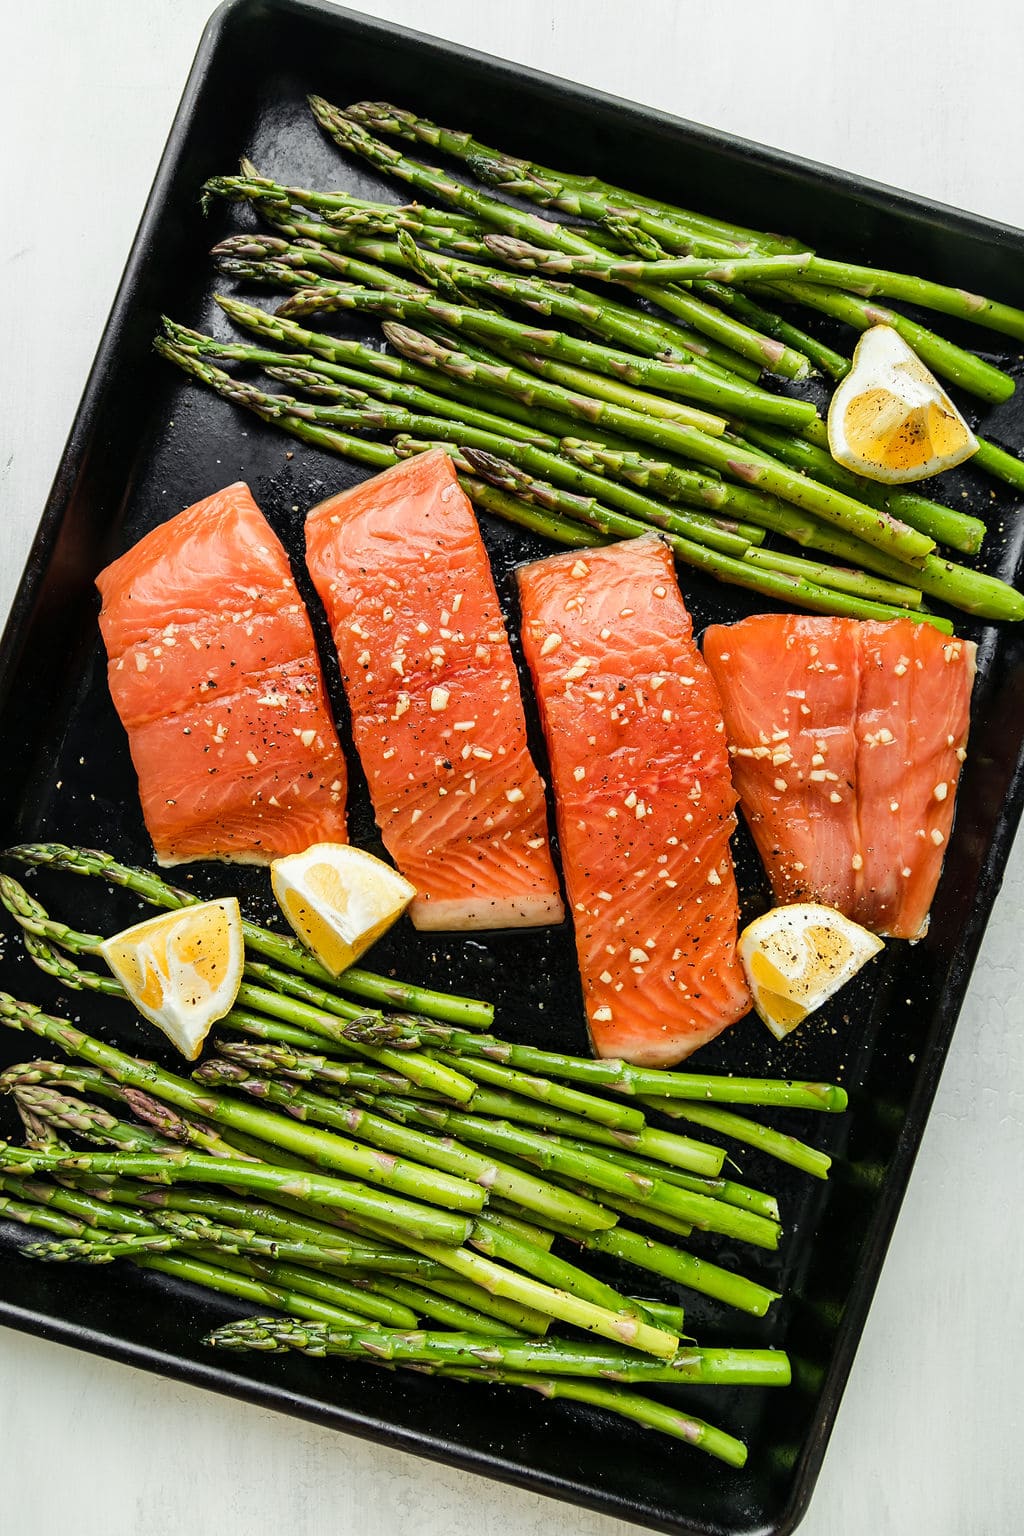 Sheet pan filled with salmon filets coated in honey garlic sauce with fresh asparagus on both side of sheet pan